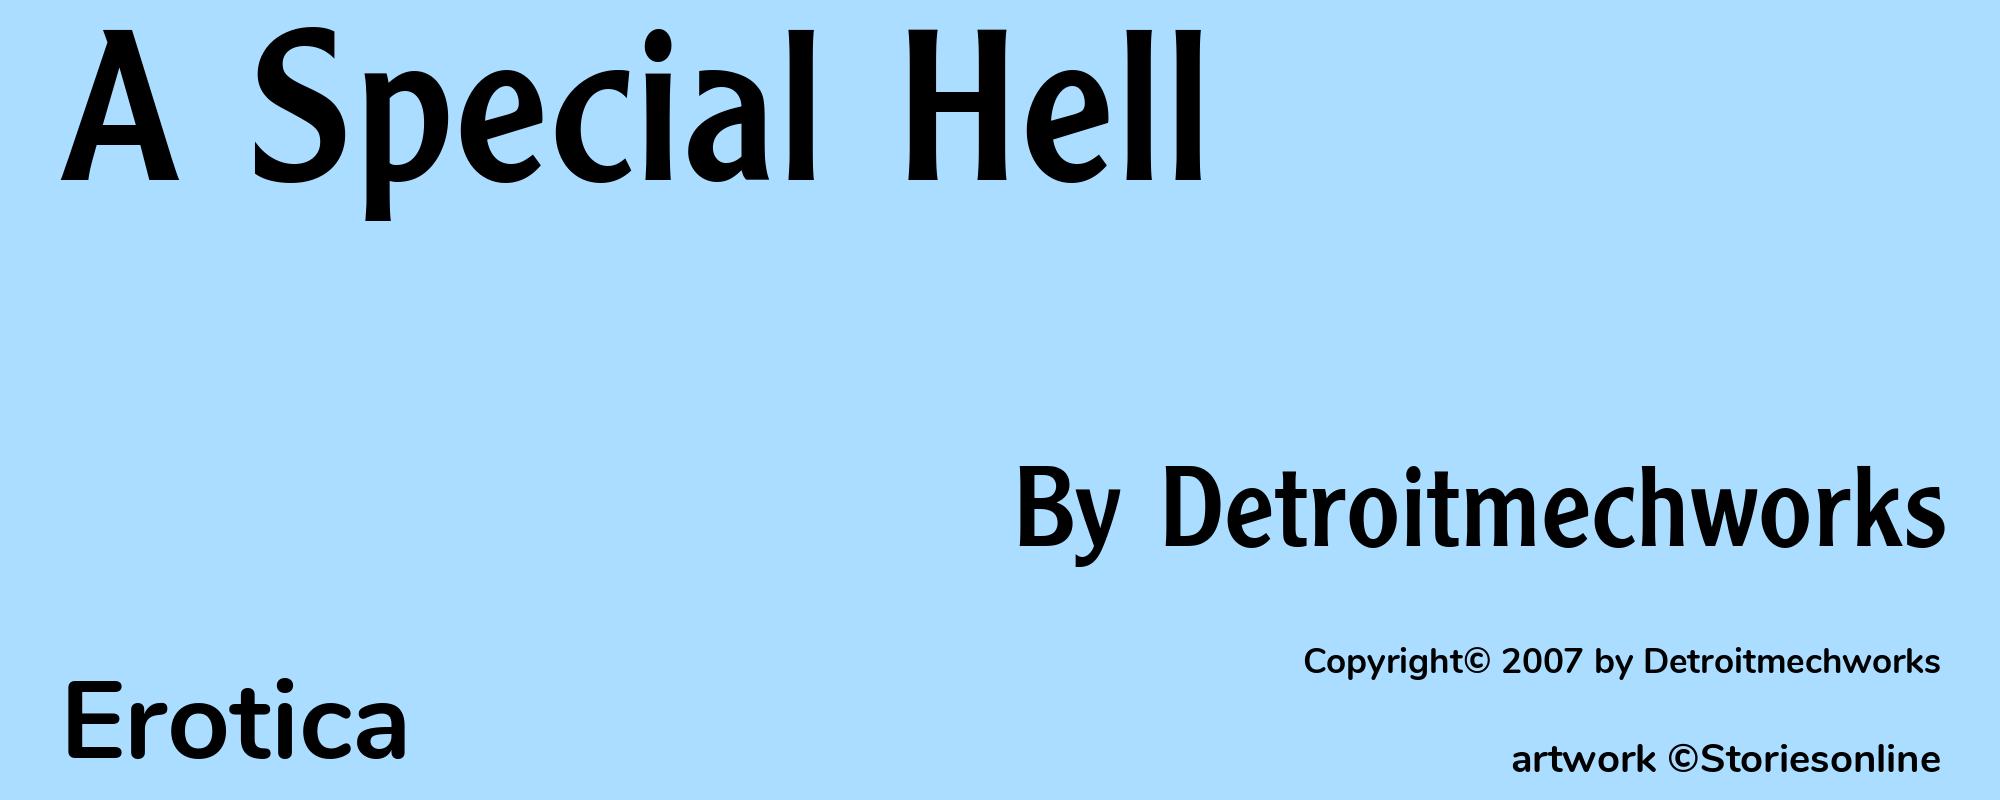 A Special Hell - Cover